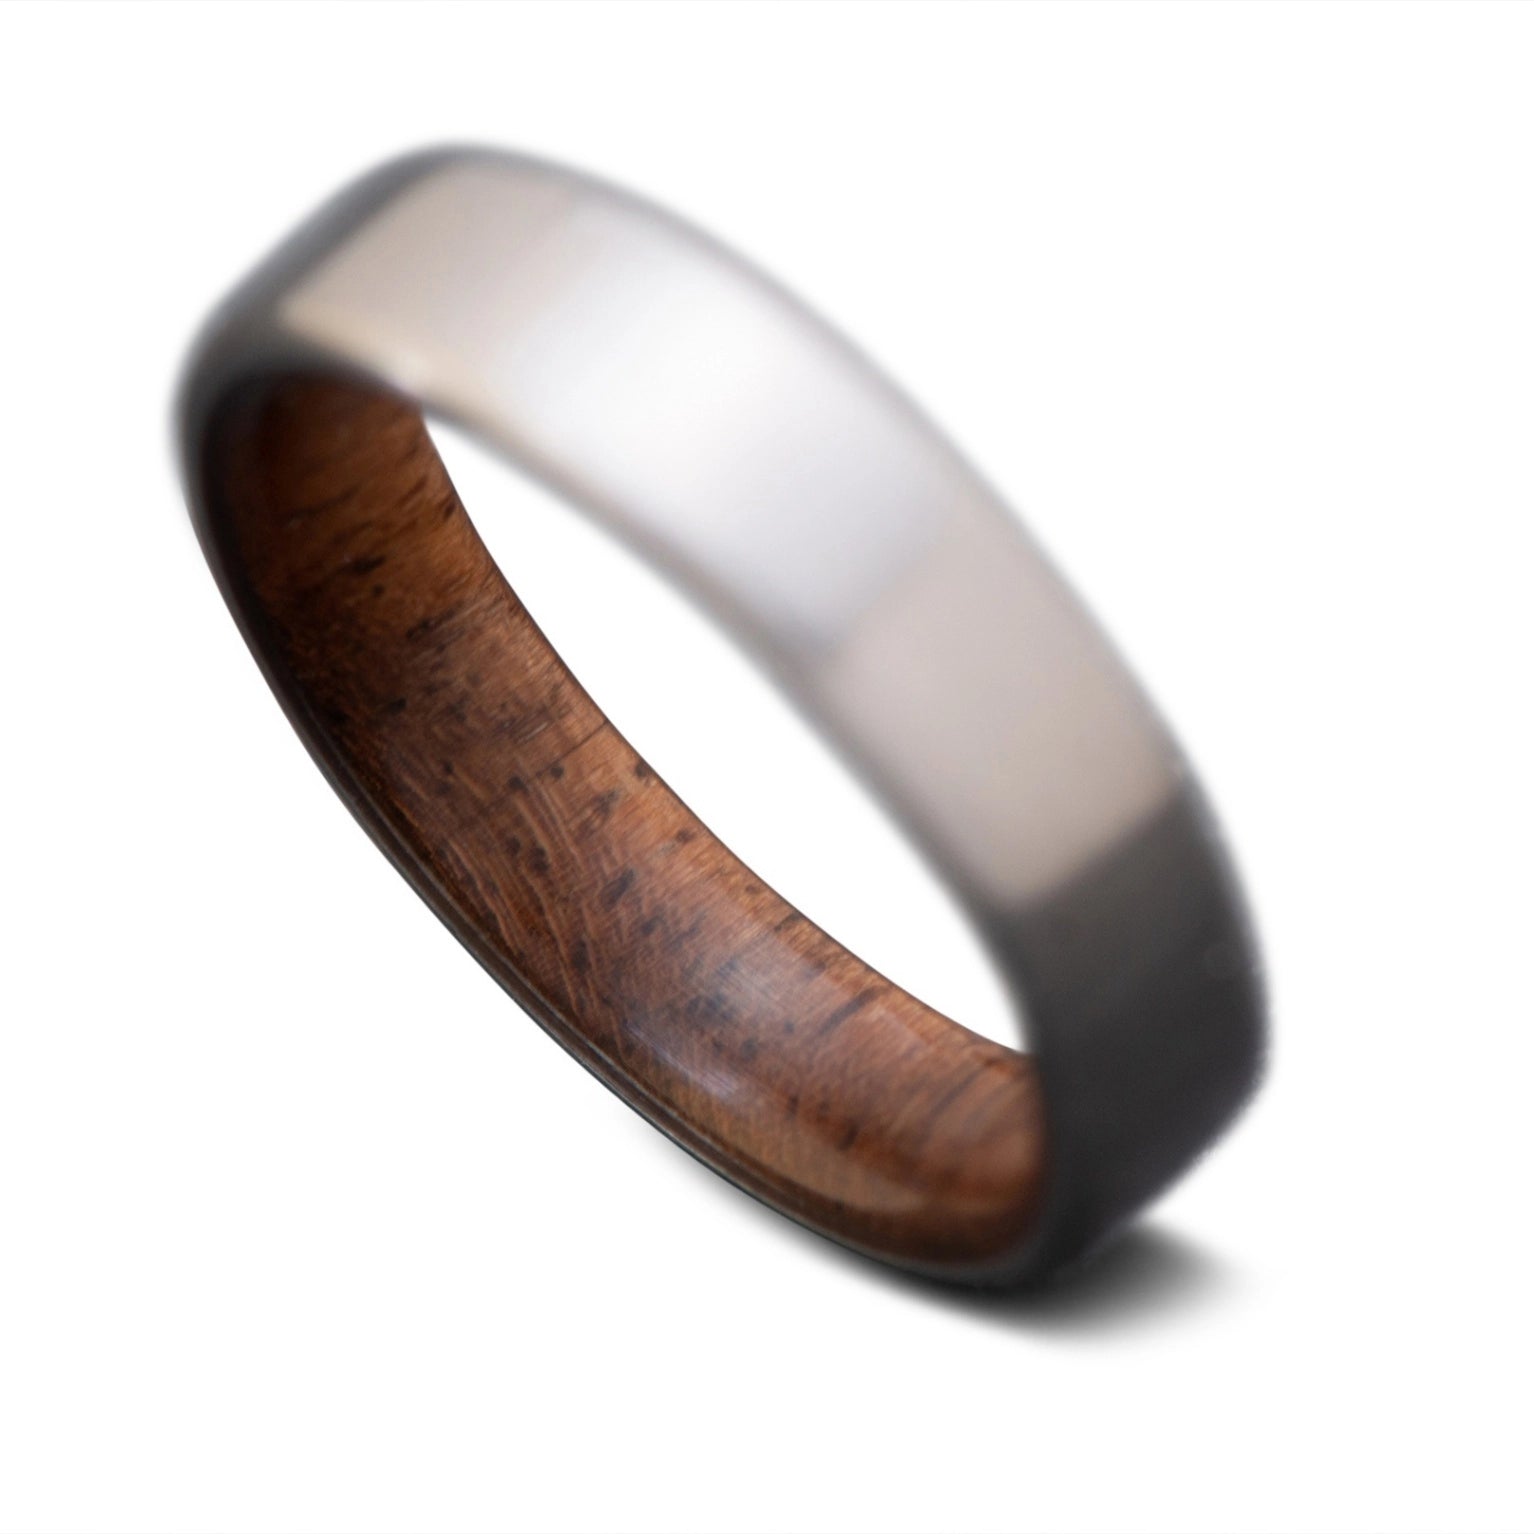 Back of Titanium Core Ring with Walnut inner sleeve,4mm -THE TITAN